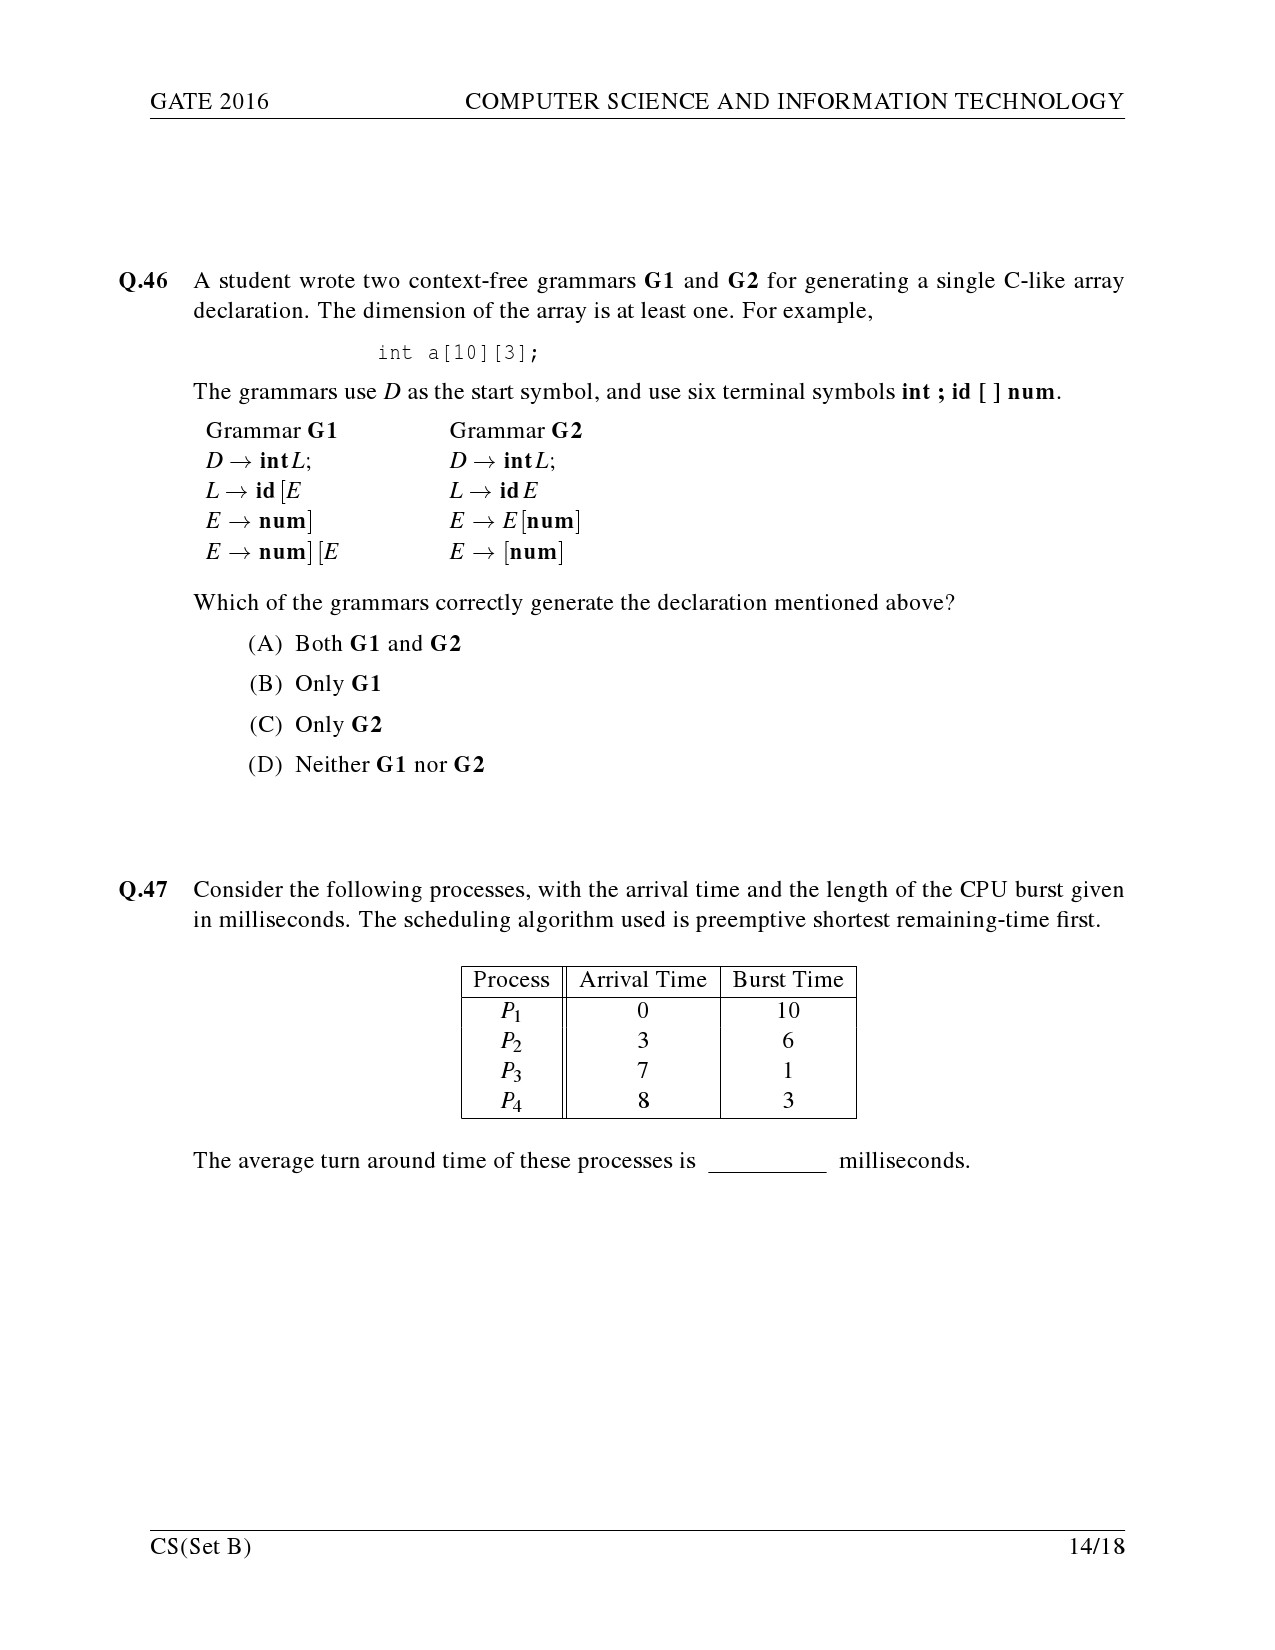 GATE Exam Question Paper 2016 Computer Science and Information Technology Set B 17